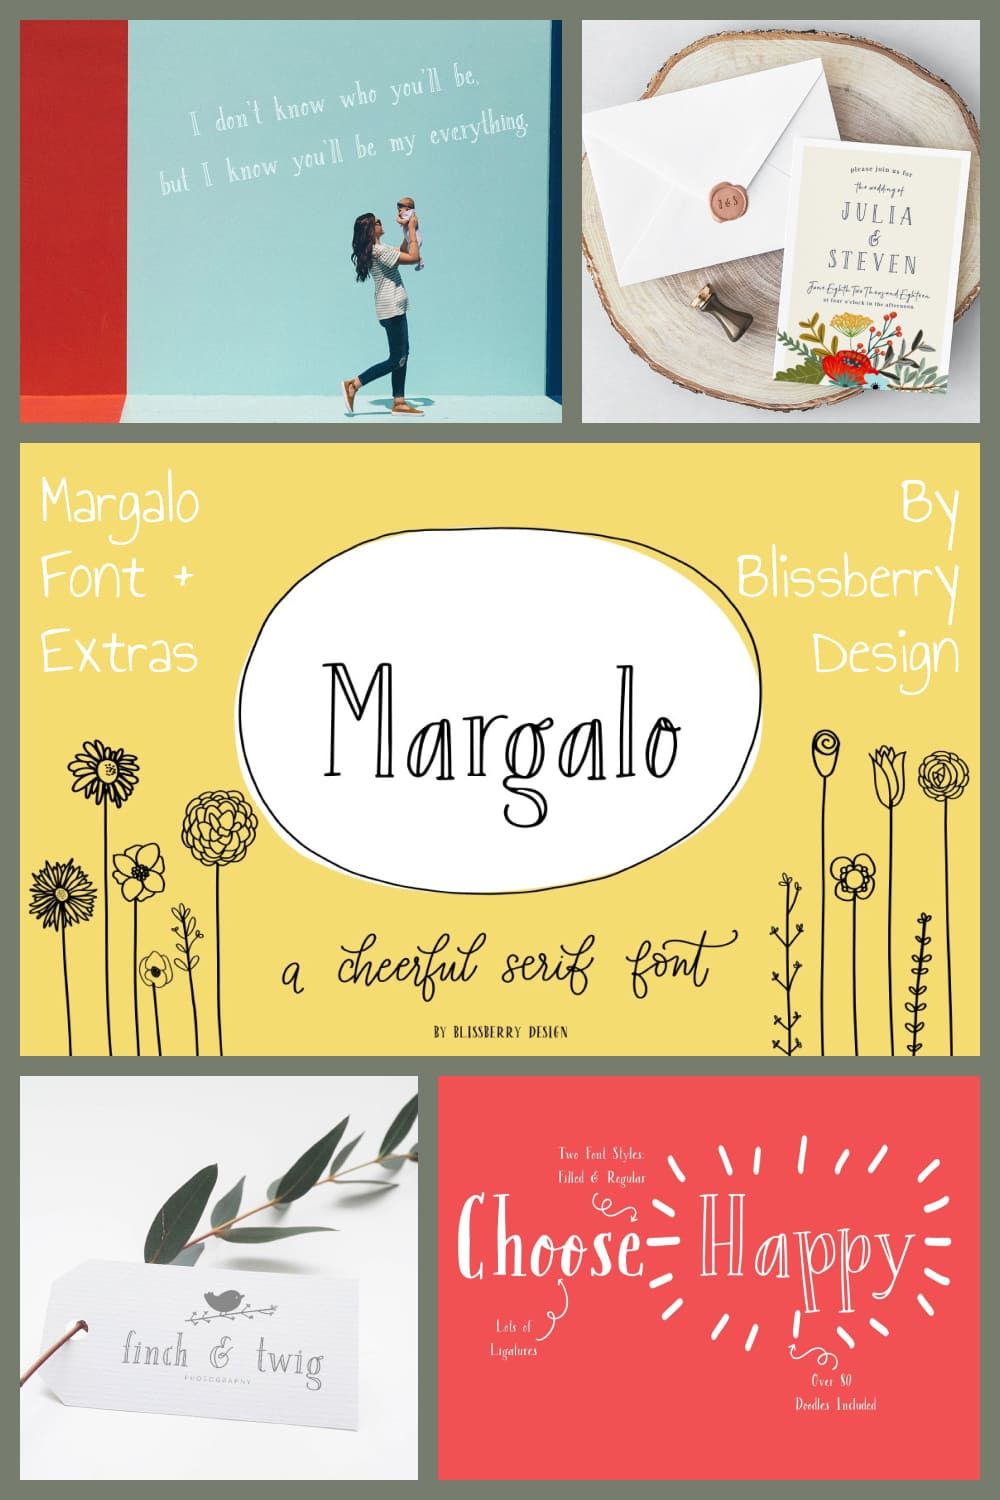 Margalo Font + Extras - A Cheerful Serif Font Previews By Blissberry Design.